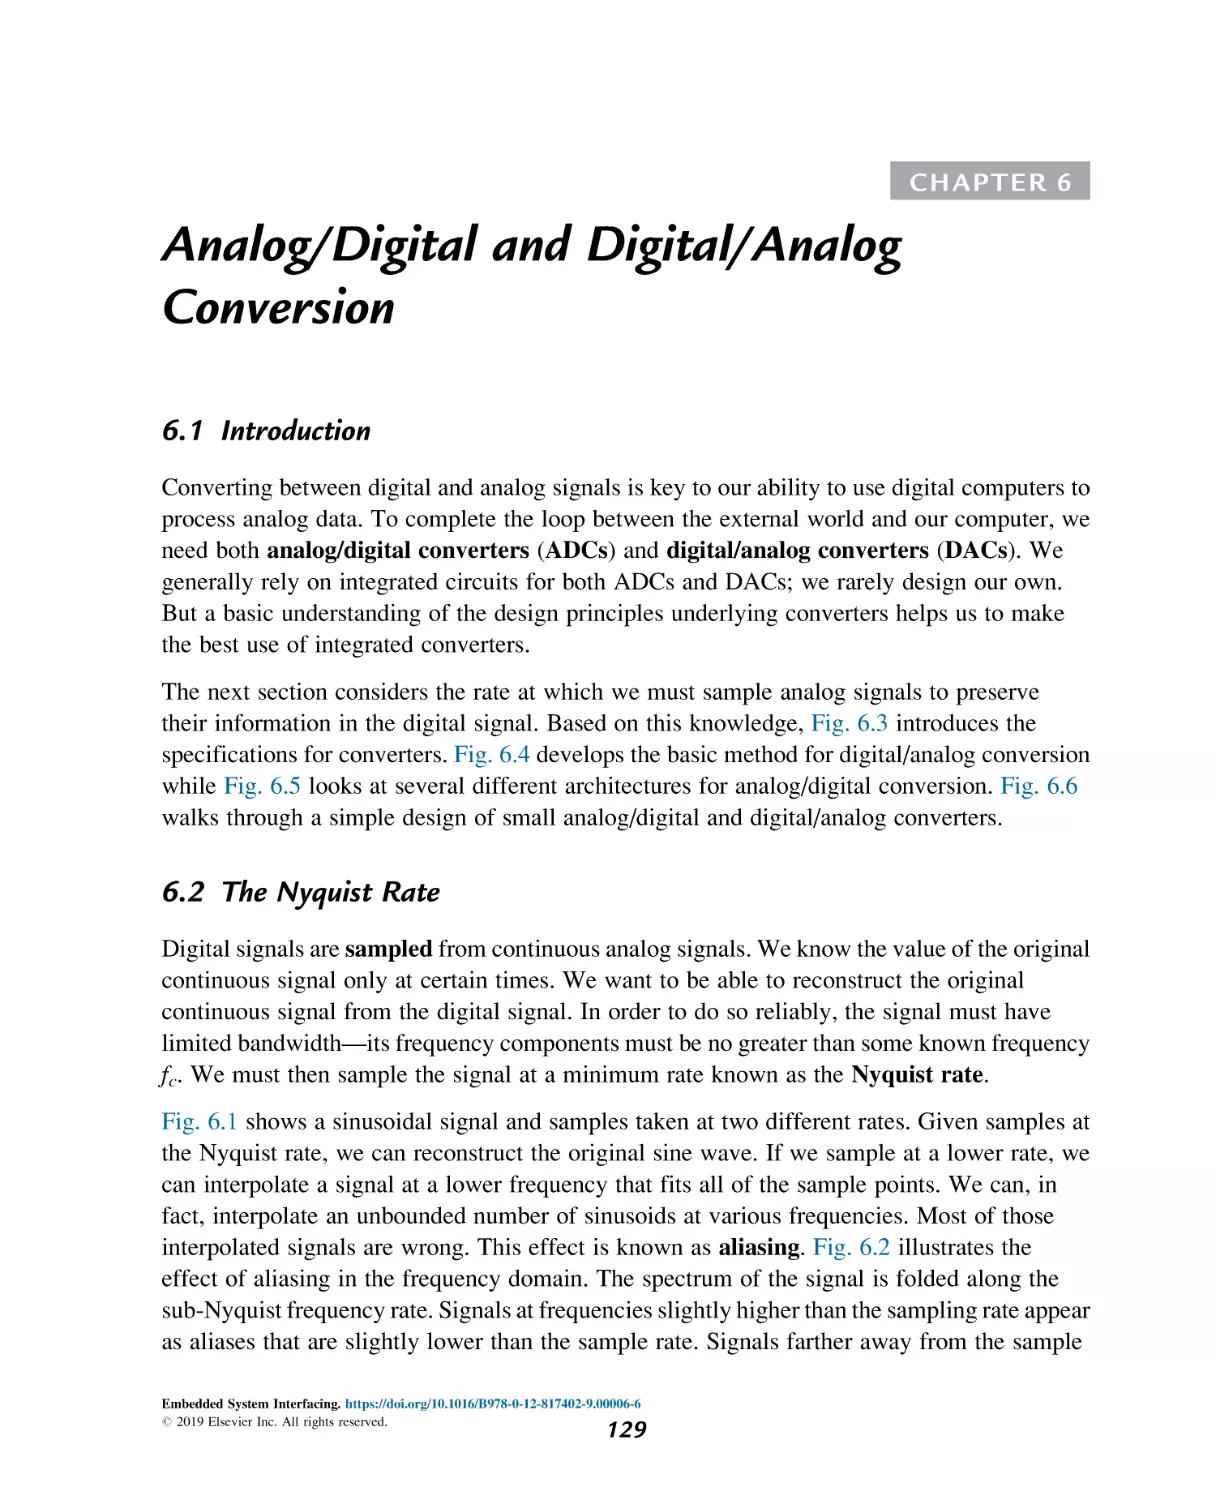 6
Analog/Digital and Digital/Analog Conversion
Introduction
The Nyquist Rate